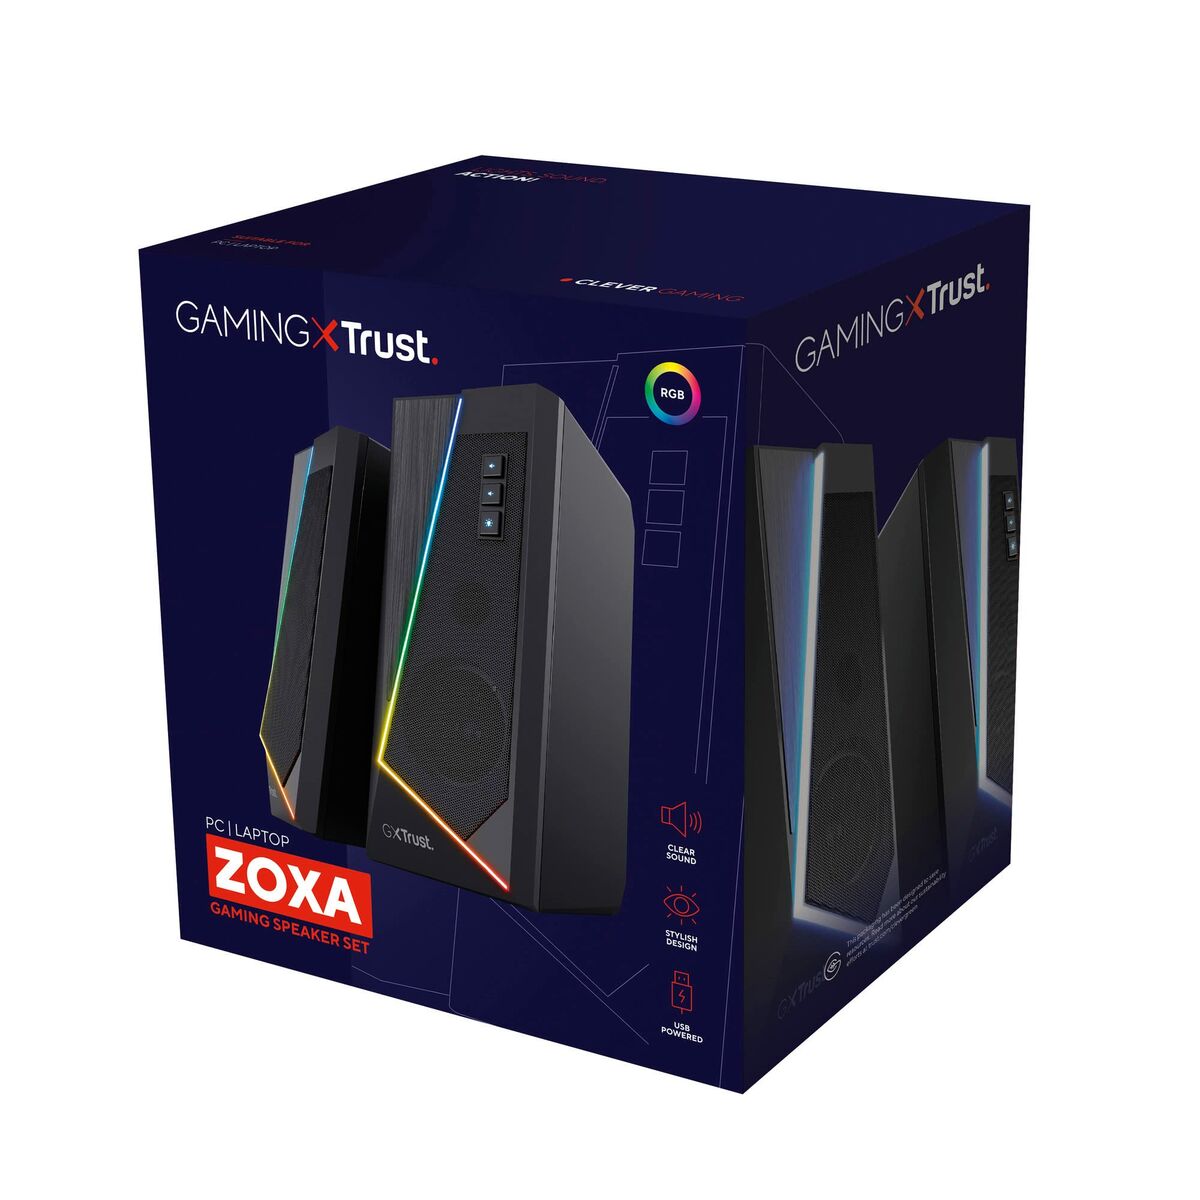 Gaming Speakers Trust GXT 609 Zoxa Black 12 W, Trust, Computing, Accessories, gaming-speakers-trust-gxt-609-zoxa-black-12-w, Brand_Trust, category-reference-2609, category-reference-2642, category-reference-2945, category-reference-t-19685, category-reference-t-19908, category-reference-t-21340, computers / peripherals, Condition_NEW, entertainment, music, office, Price_50 - 100, Teleworking, RiotNook